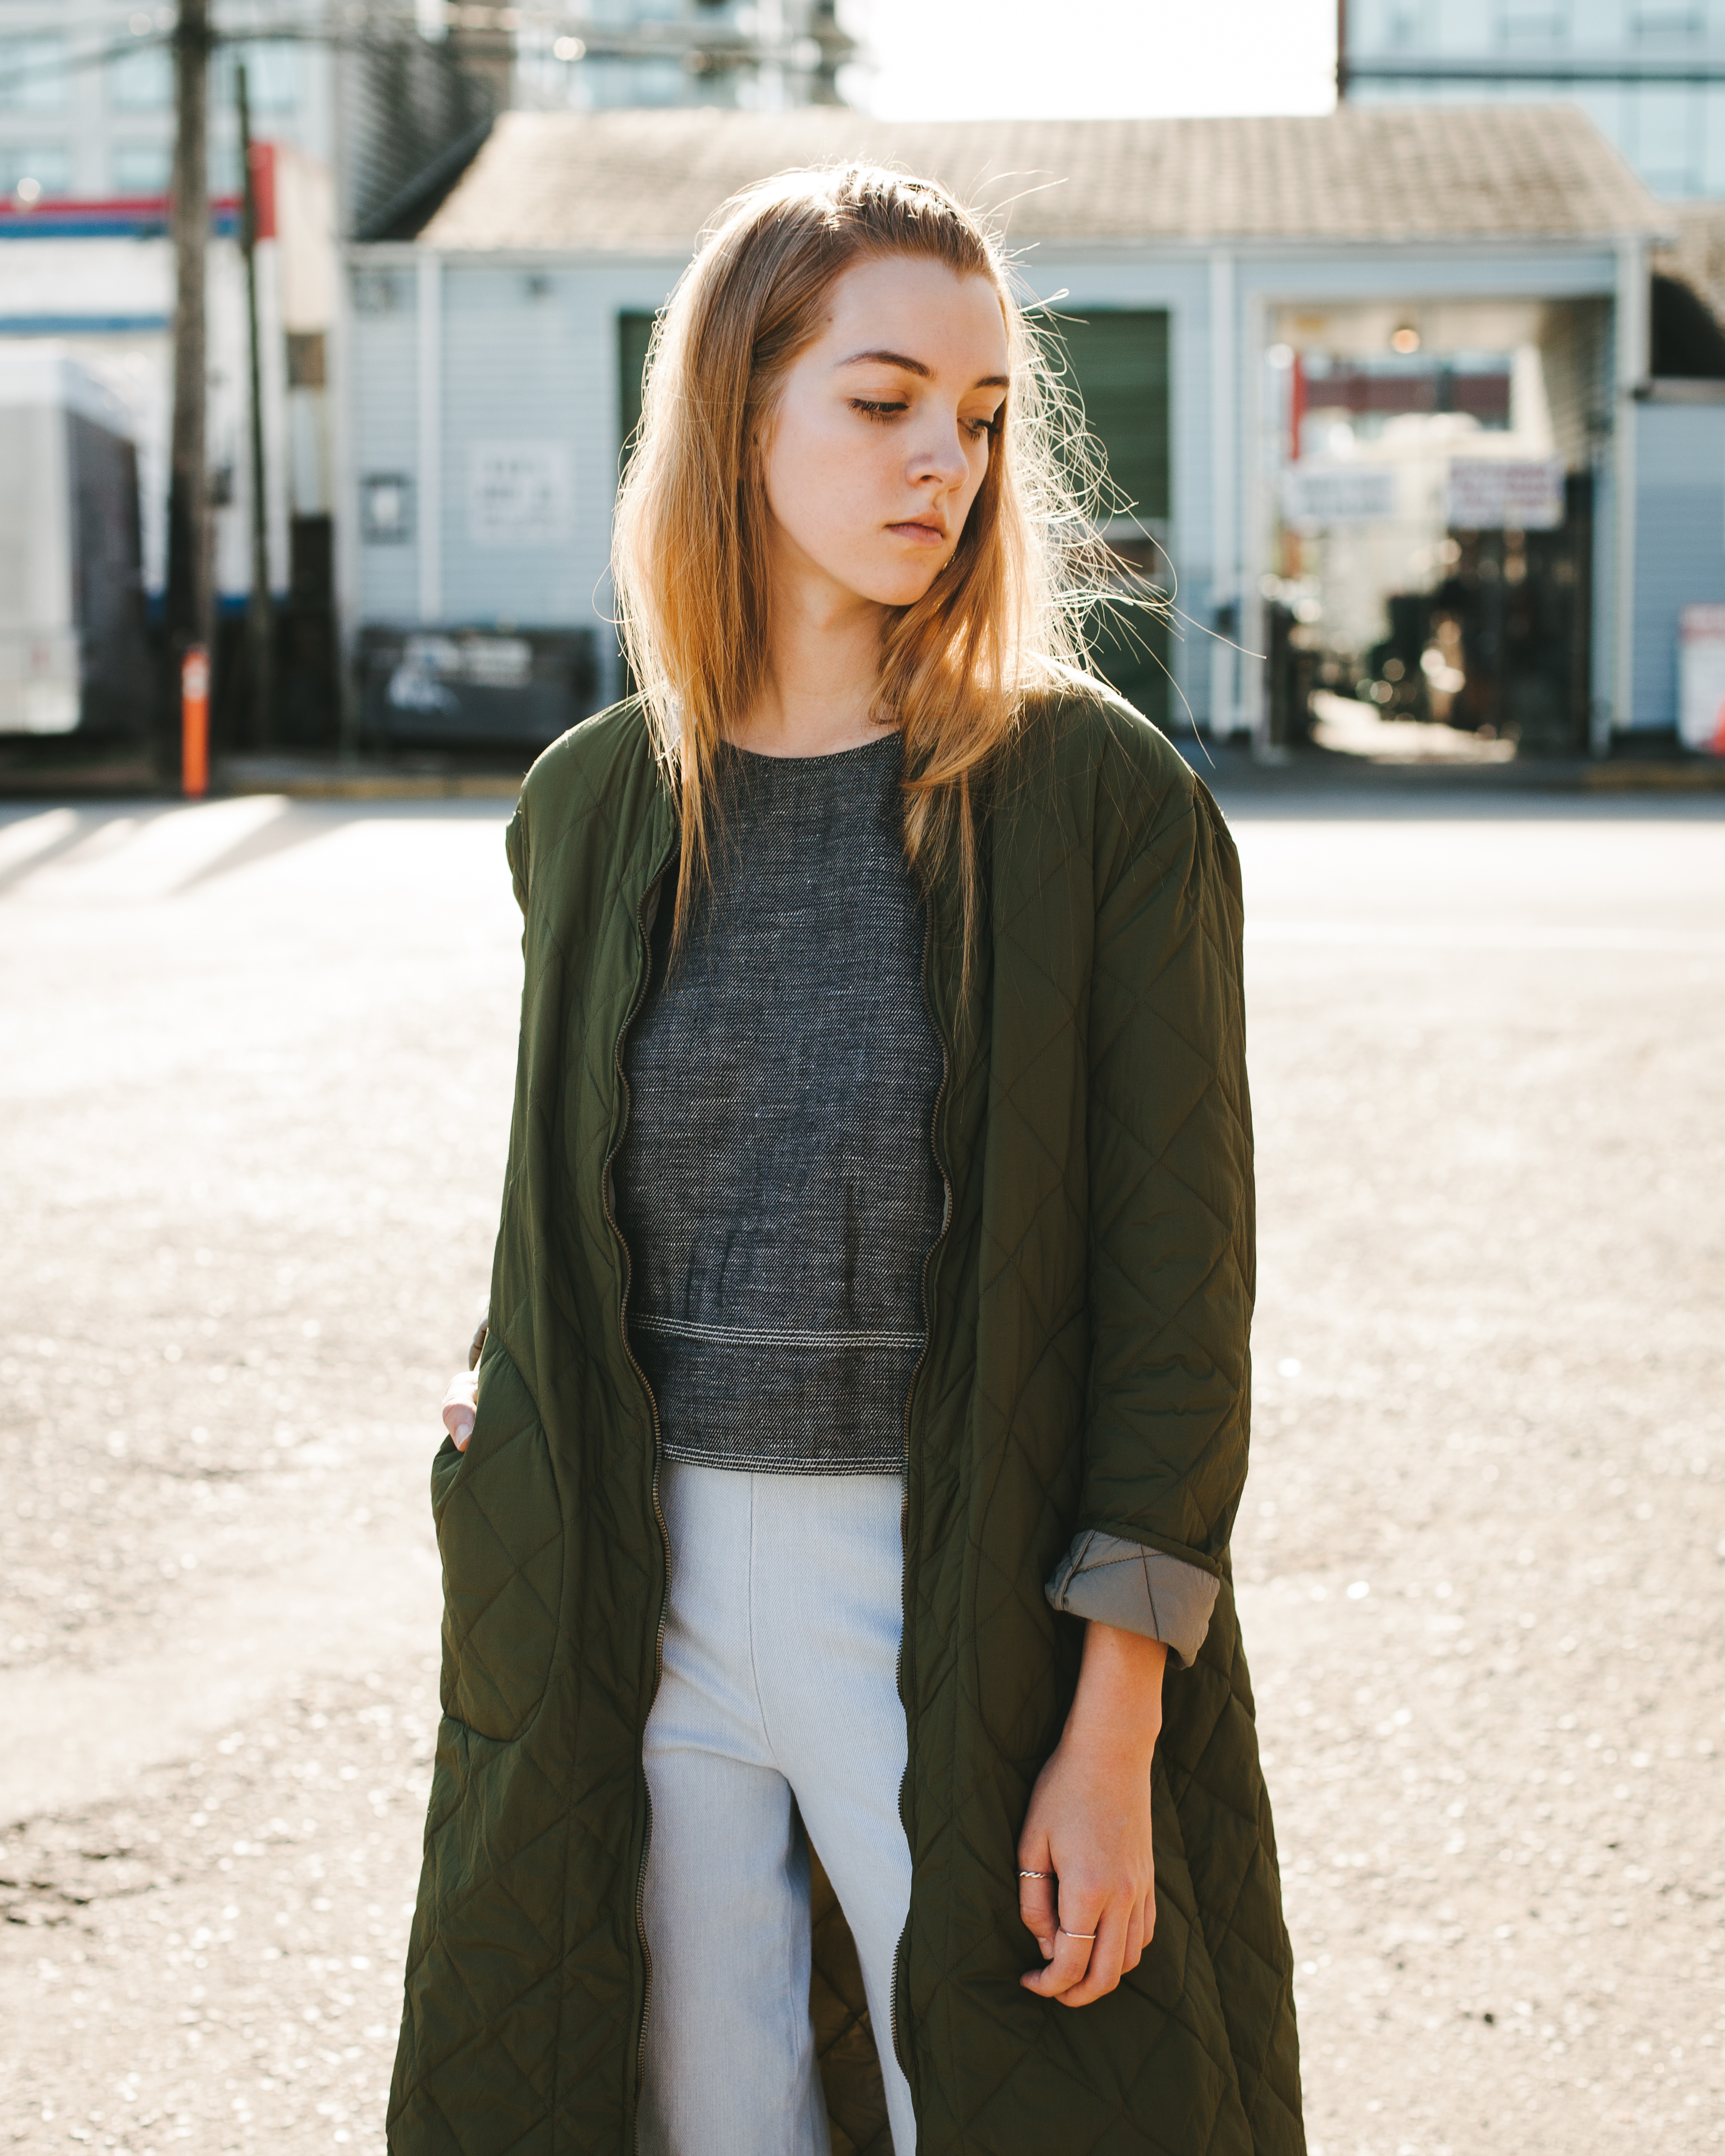 Lizbell Agency - Beautiful new images of Liv Hanna with styling by ...